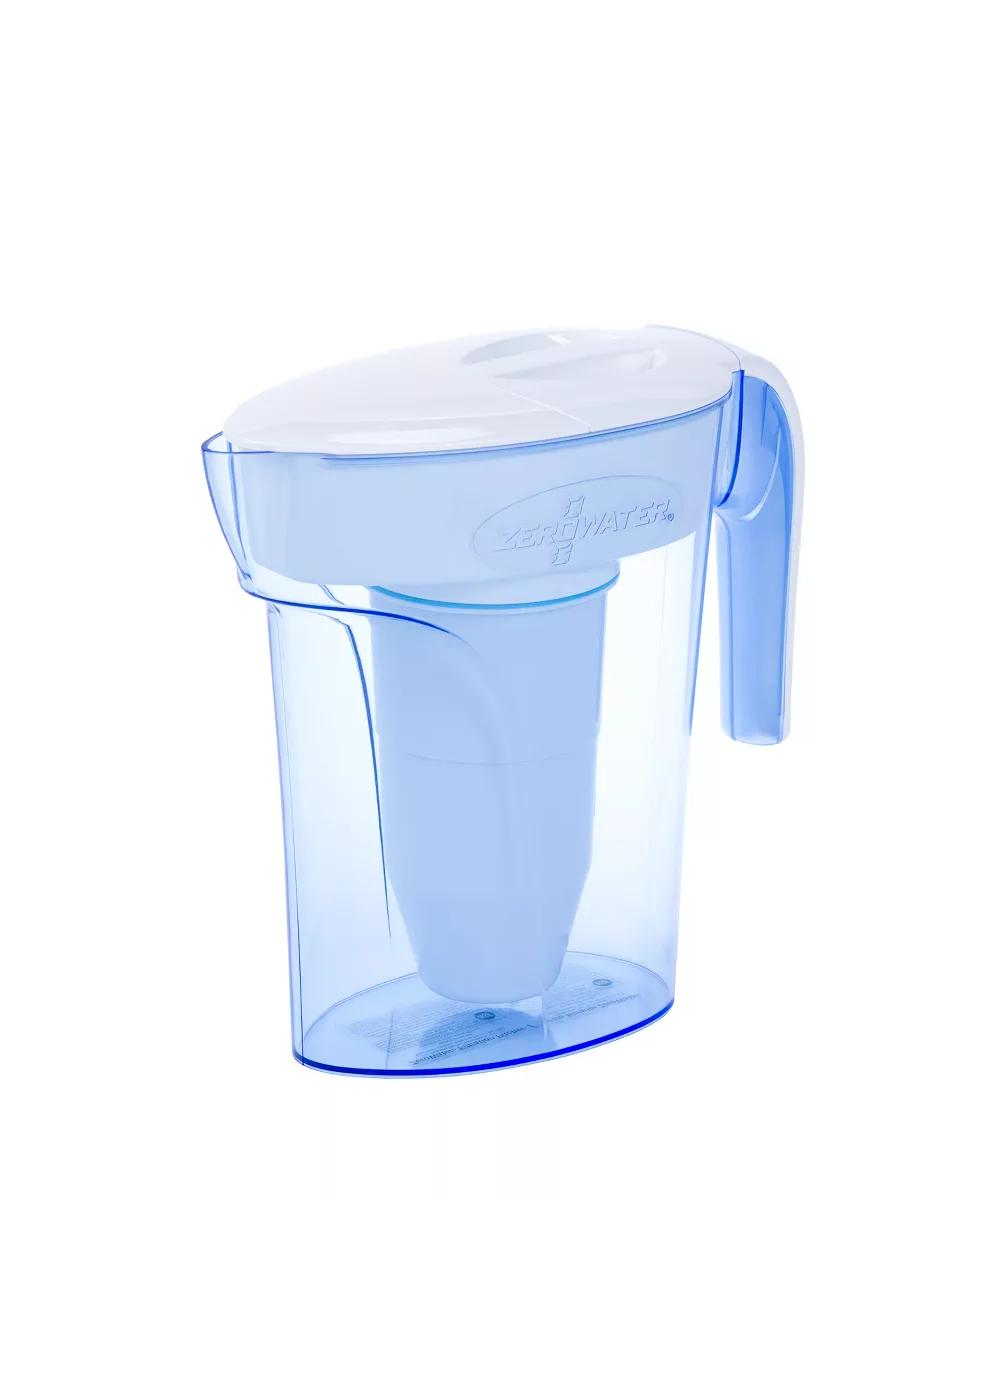 ZeroWater 5-Stage Water Filtration Pitcher; image 2 of 2